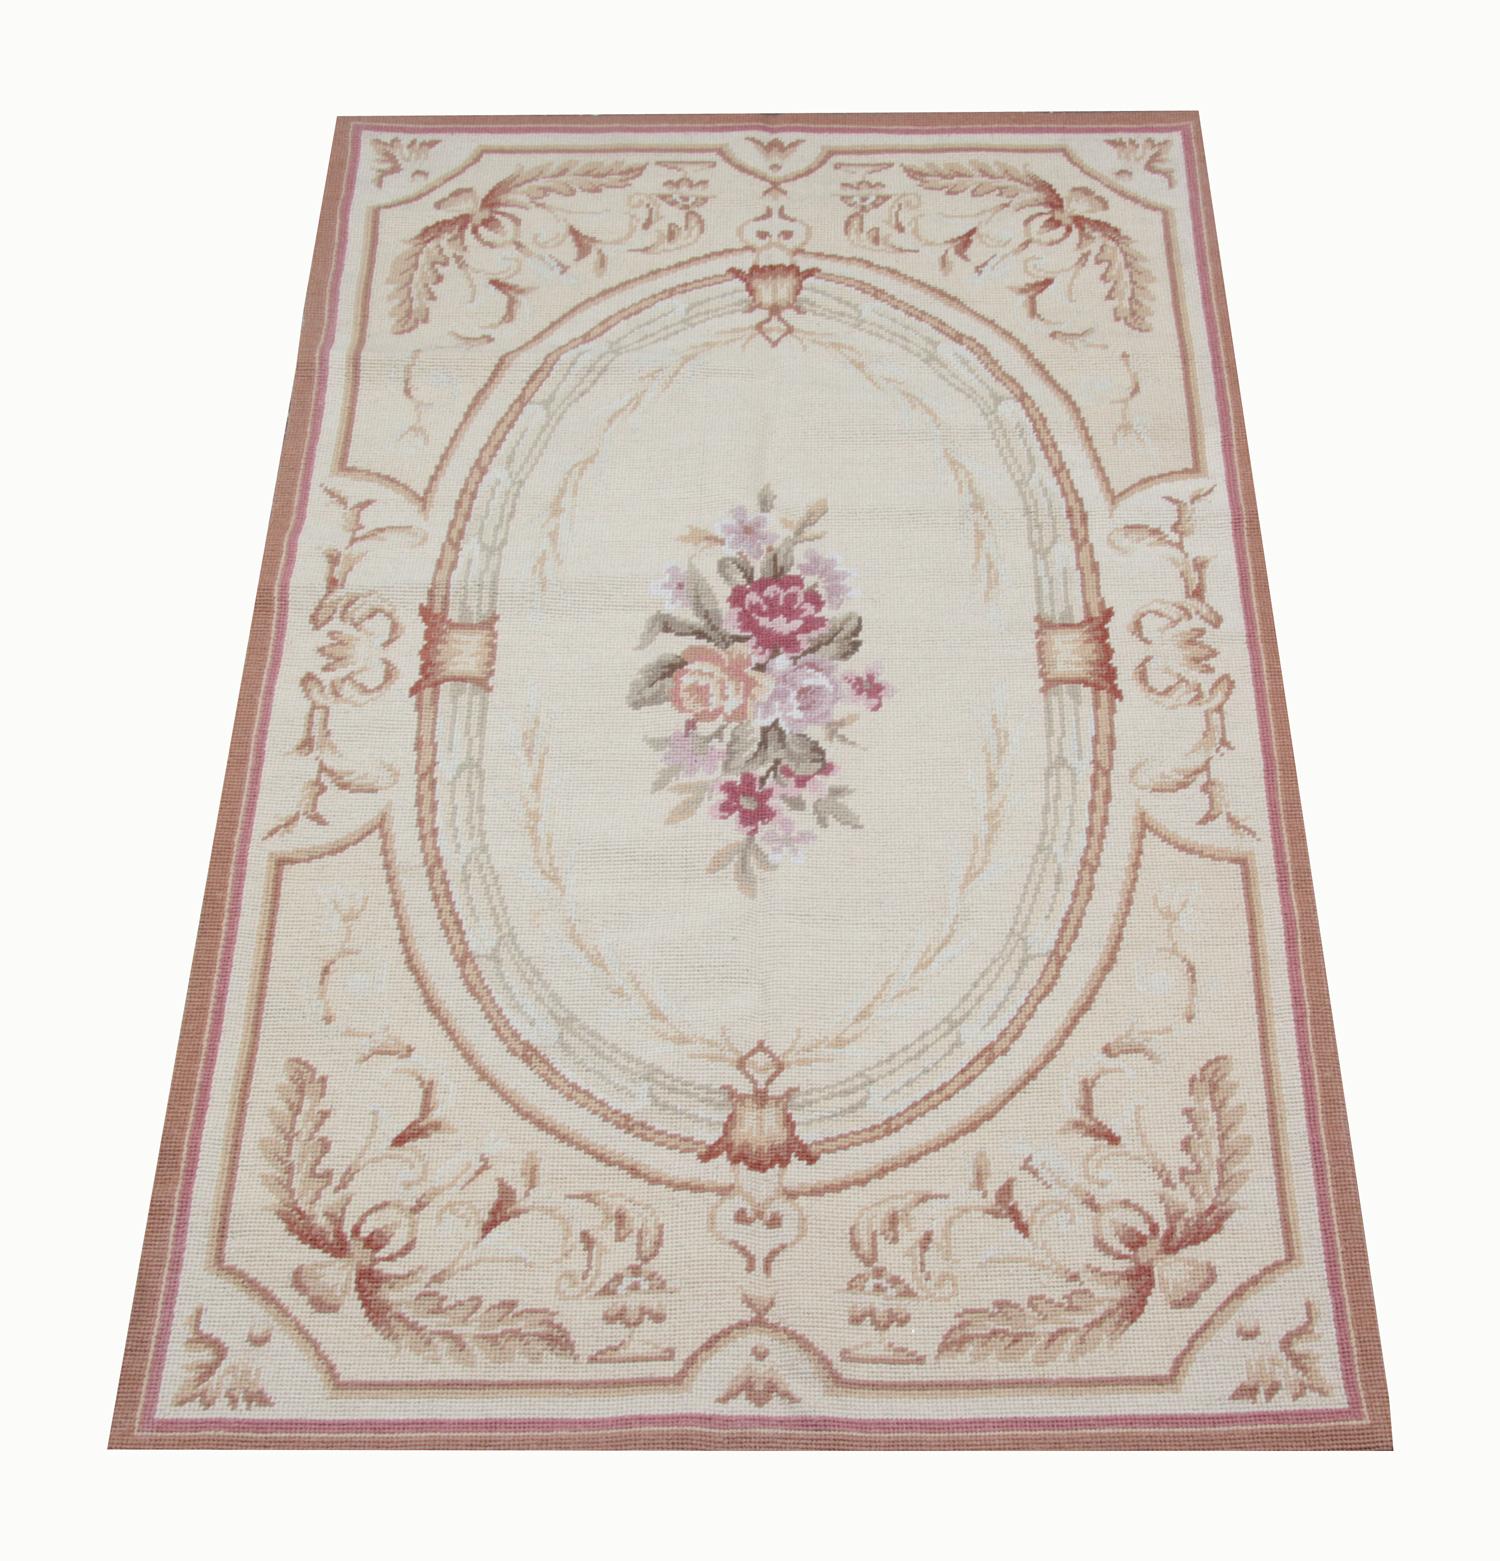 This Beige cream rug is the very good item as living room rugs and getting most of the attention in rug store by clients because of the color and design. These handmade elegant Chinese Aubusson floor rugs has The soft shade of colors. these luxury